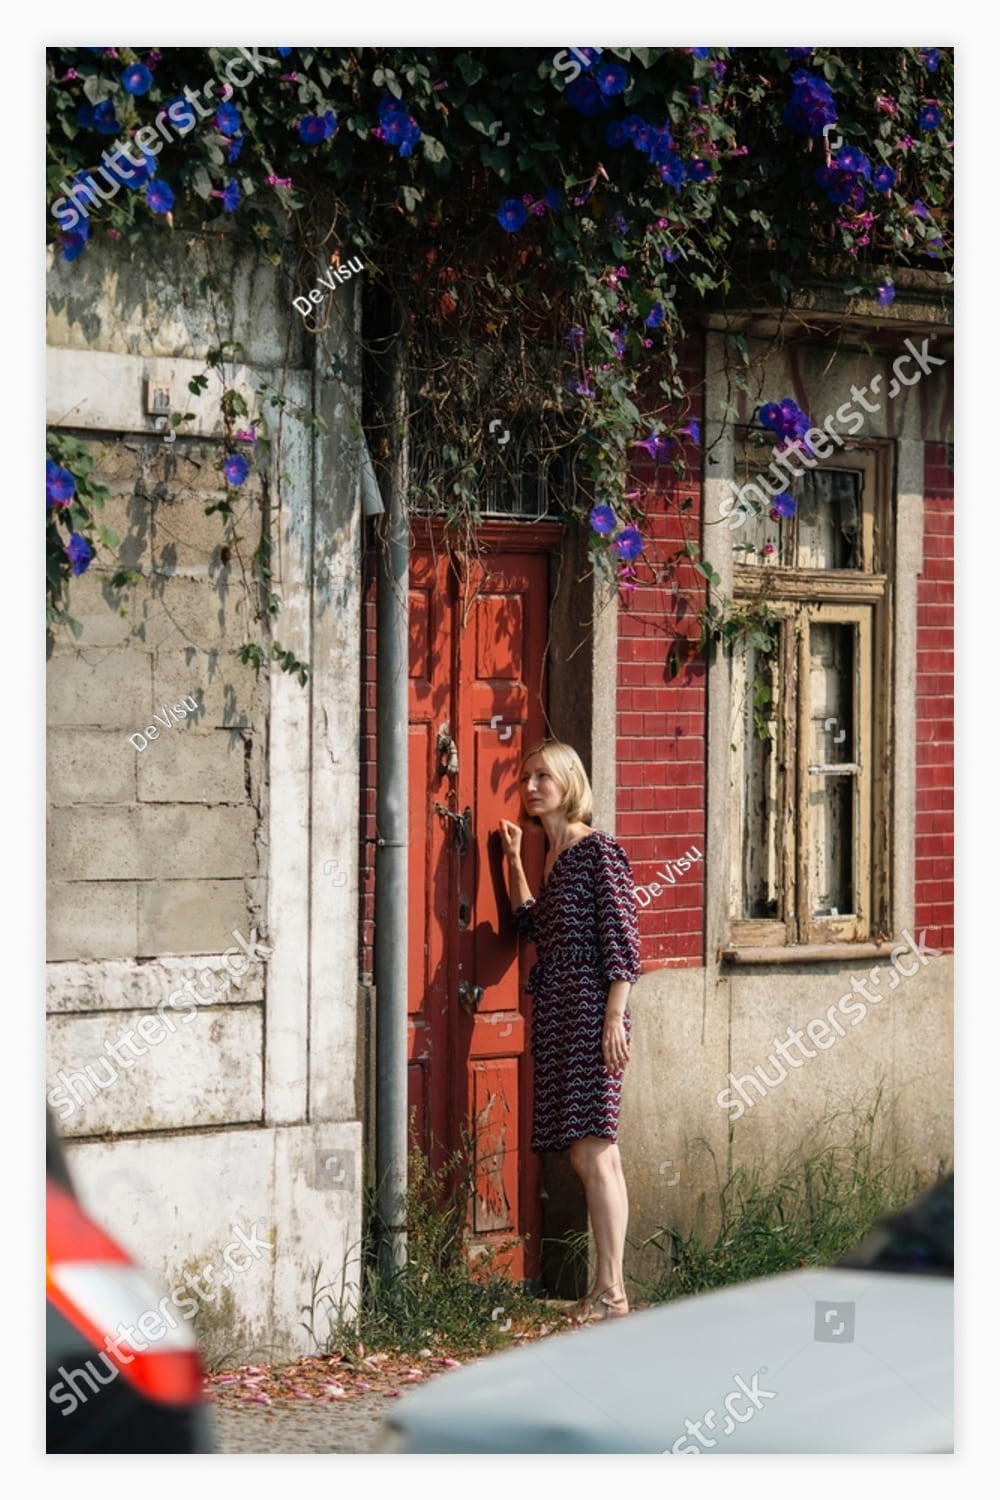 A woman stands outside the door of an abandoned house.